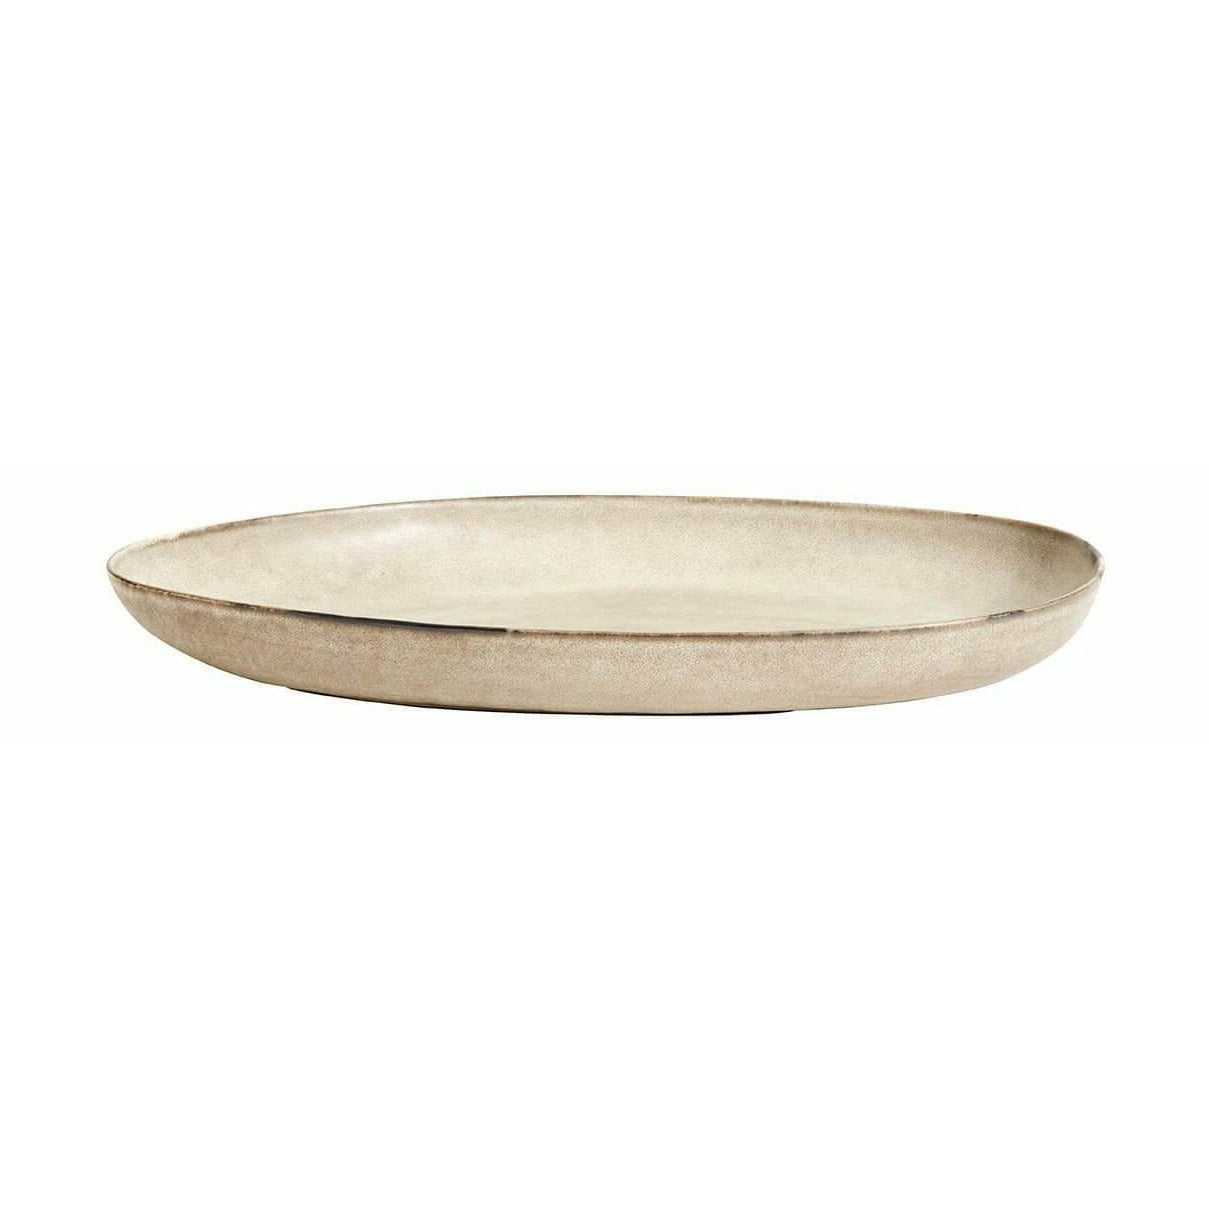 Muubs Mame Service Plate Oval Oyster, 43 cm